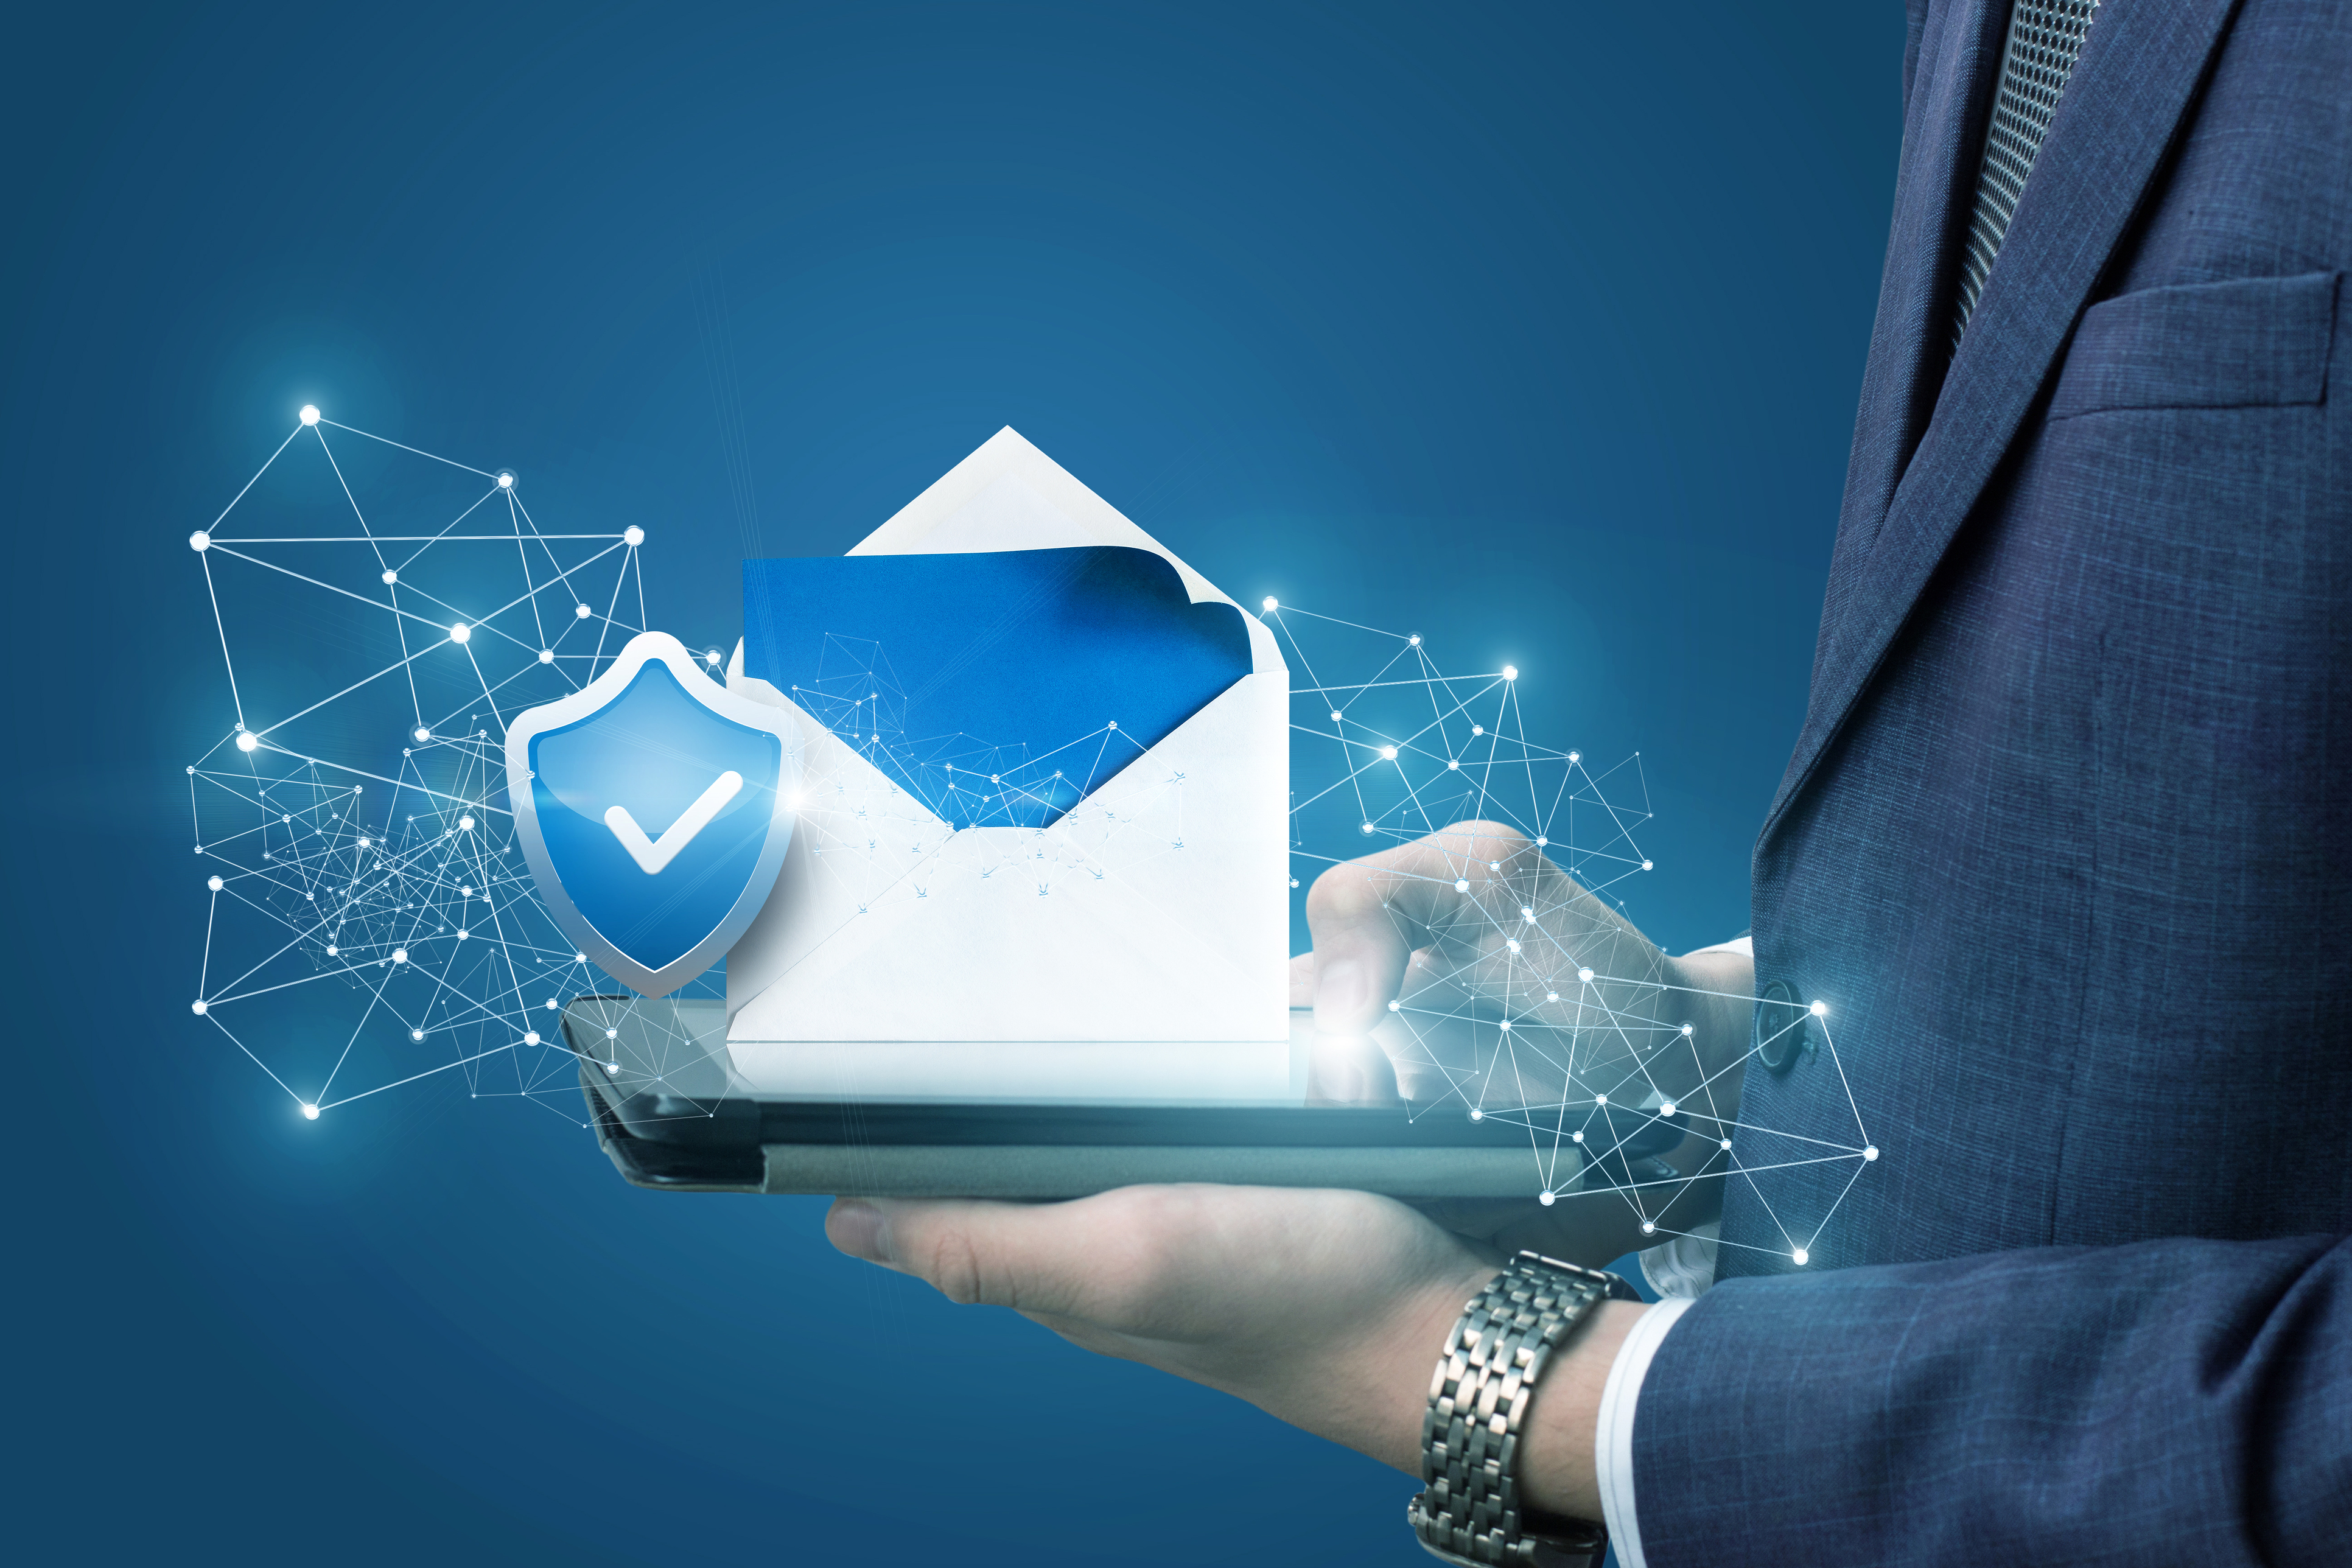 7 Steps to Ensure Your Email is Secure